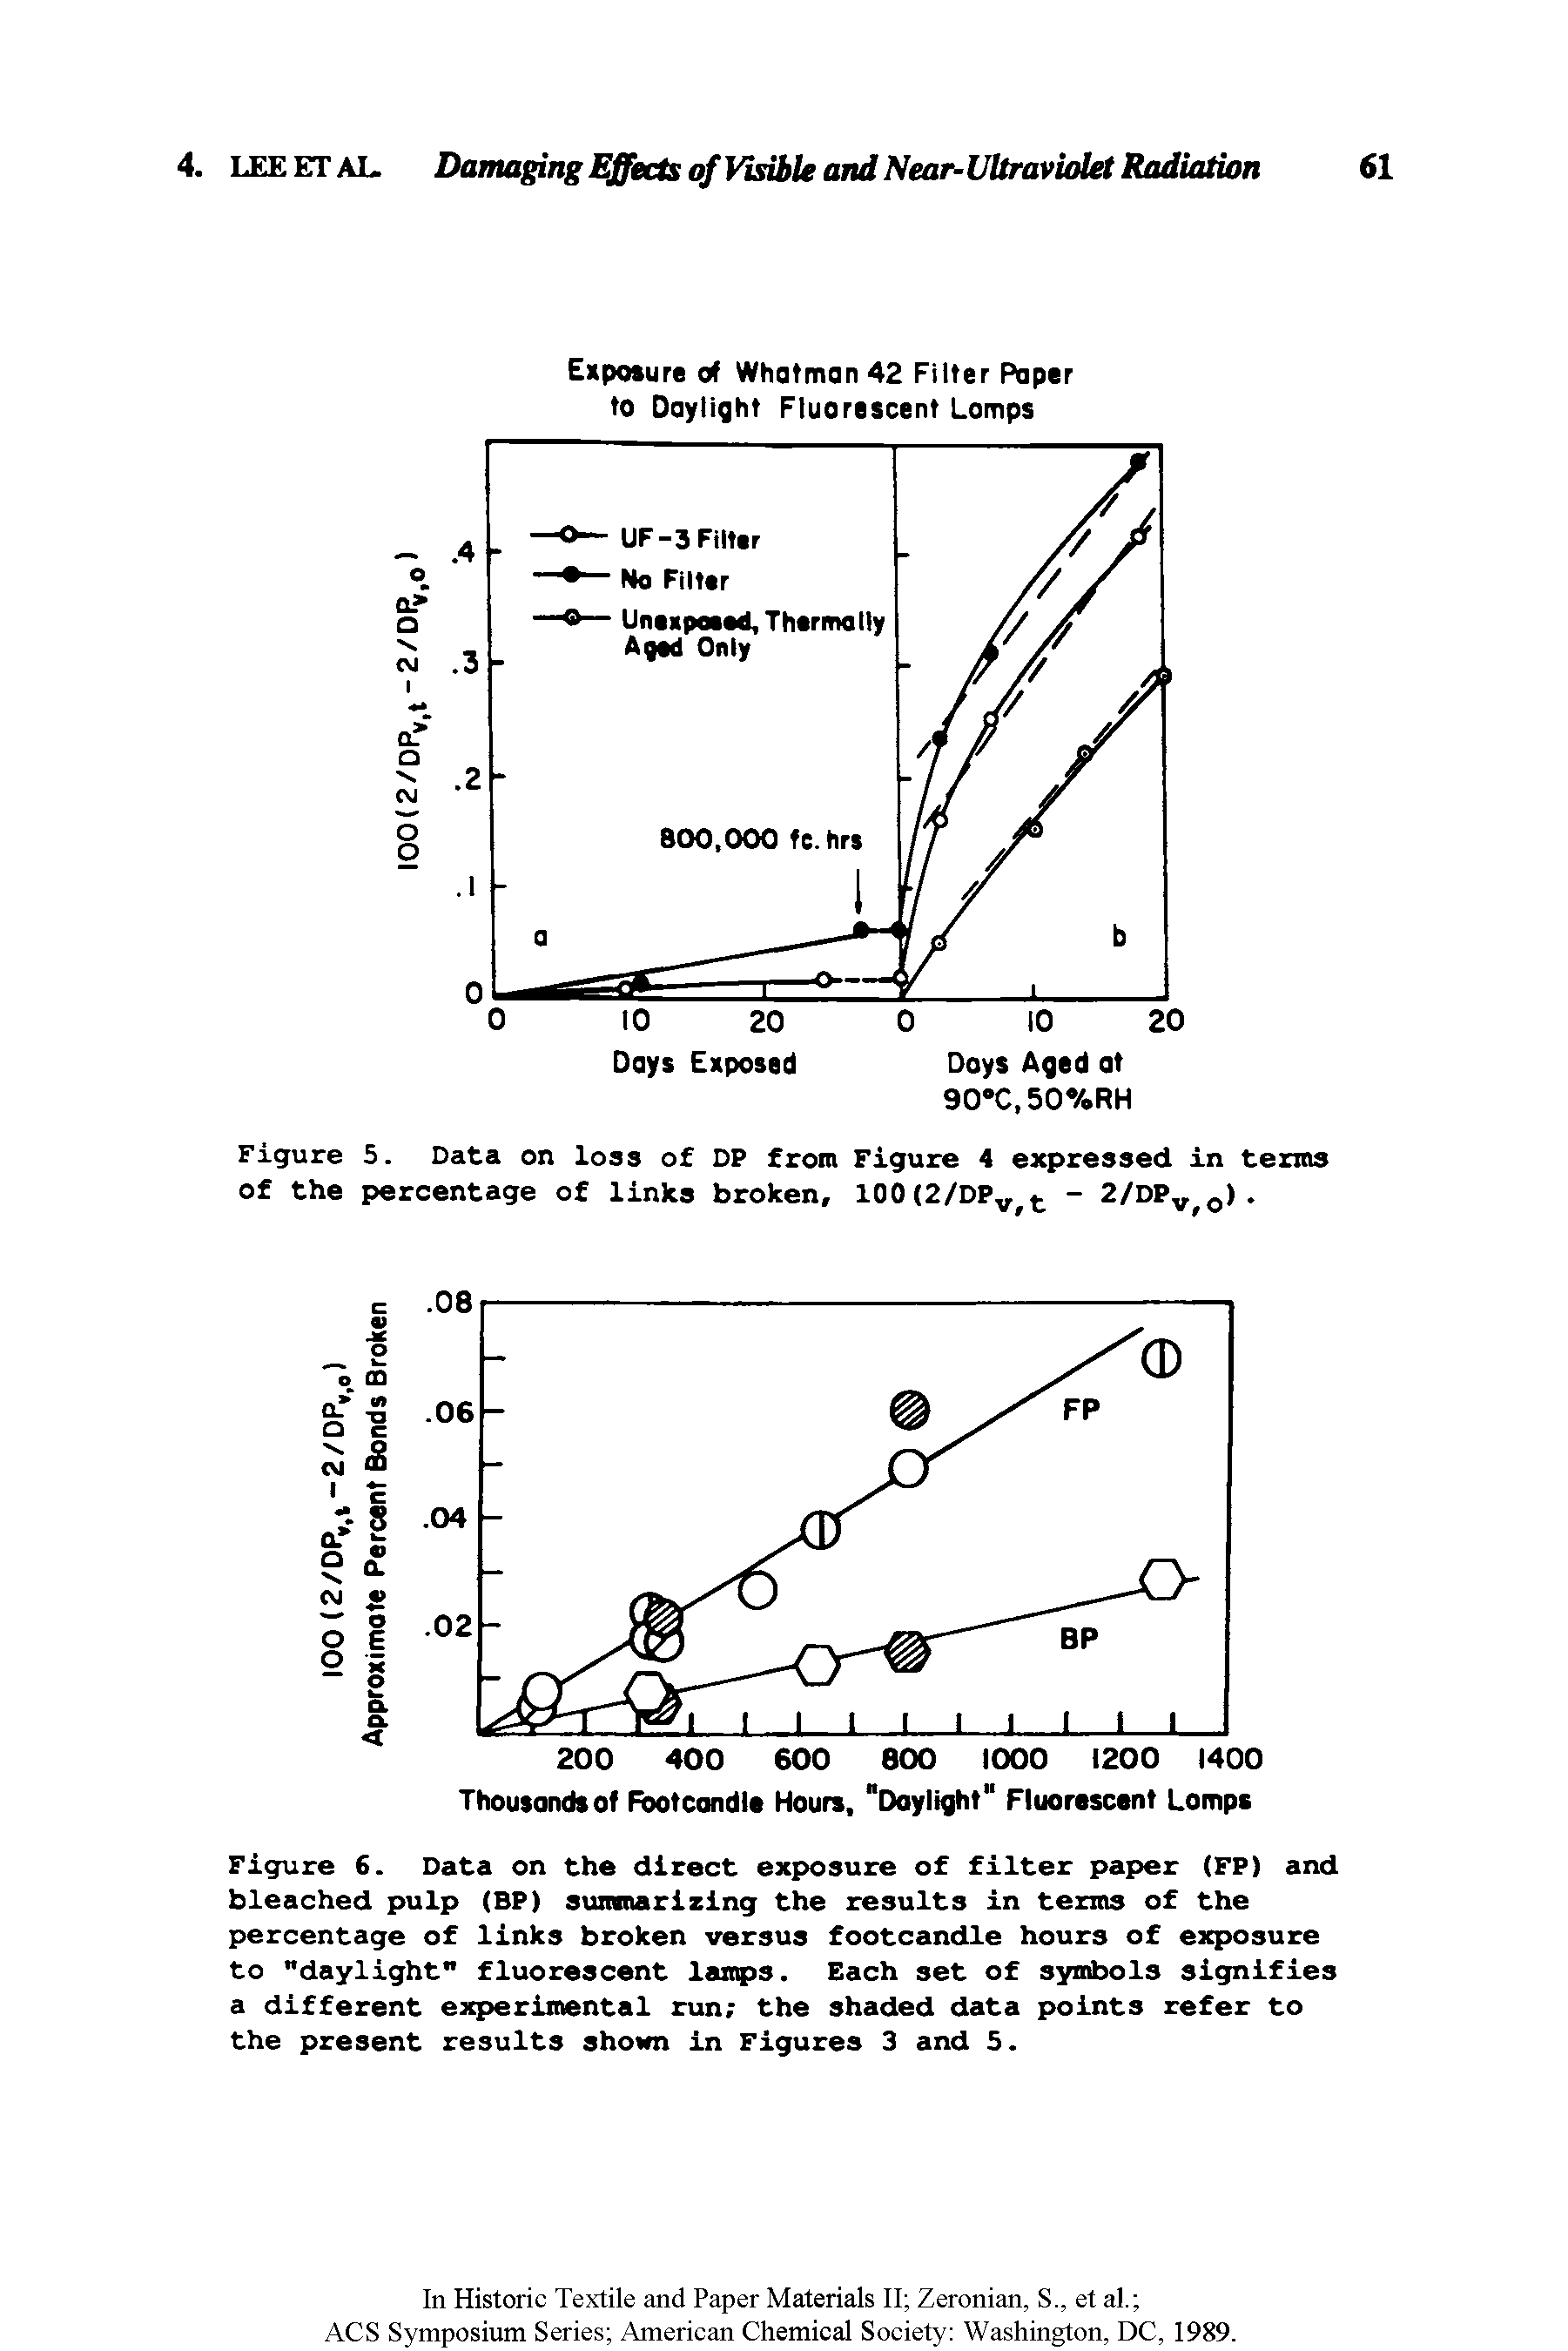 Figure 6. Data on the direct exposure of filter paper (FP) and bleached pulp (BP) summarizing the results in terms of the percentage of links broken versus footcandle hours of exposure to "daylight" fluorescent lamps. Each set of symbols signifies a different experimental run the shaded data points refer to the present results shown in Figures 3 and 5.